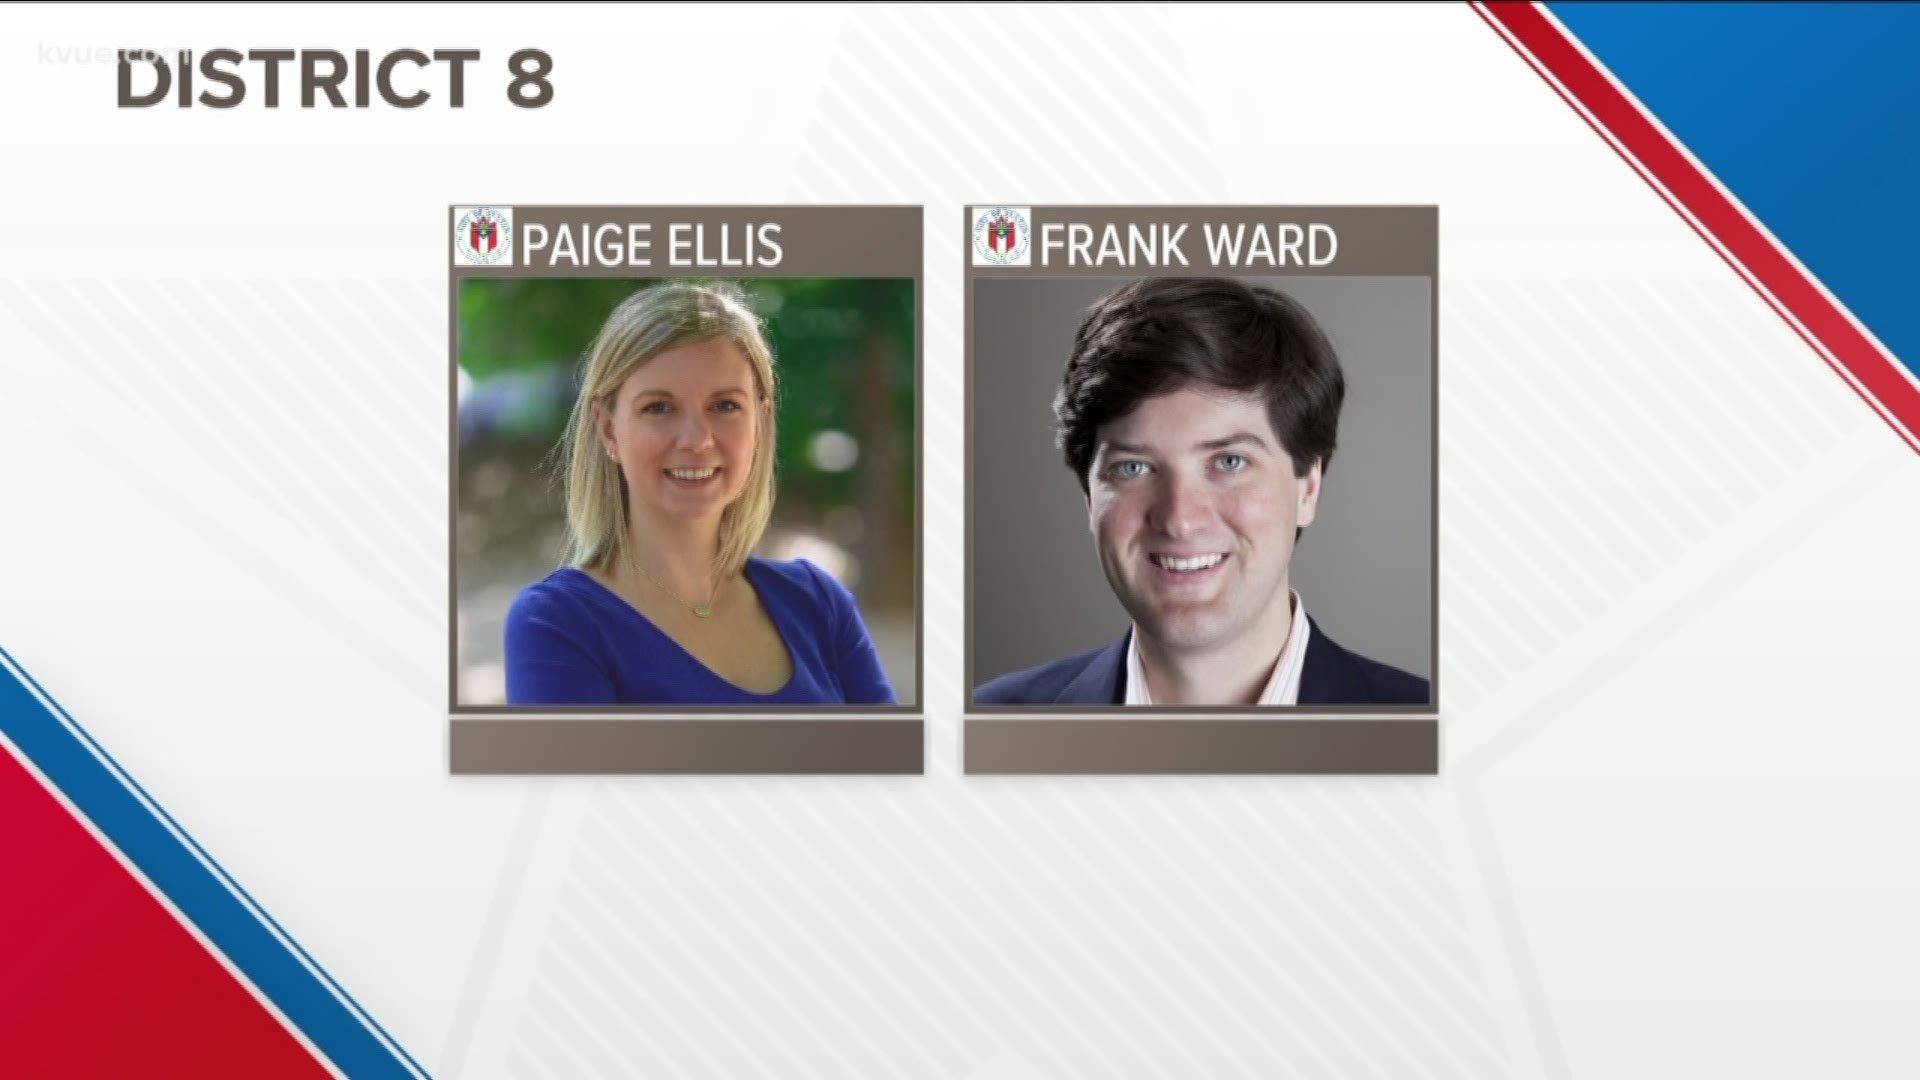 Tonight we're rounding out our series on the Austin City Council Runoff elections with a look at the race for District 8.